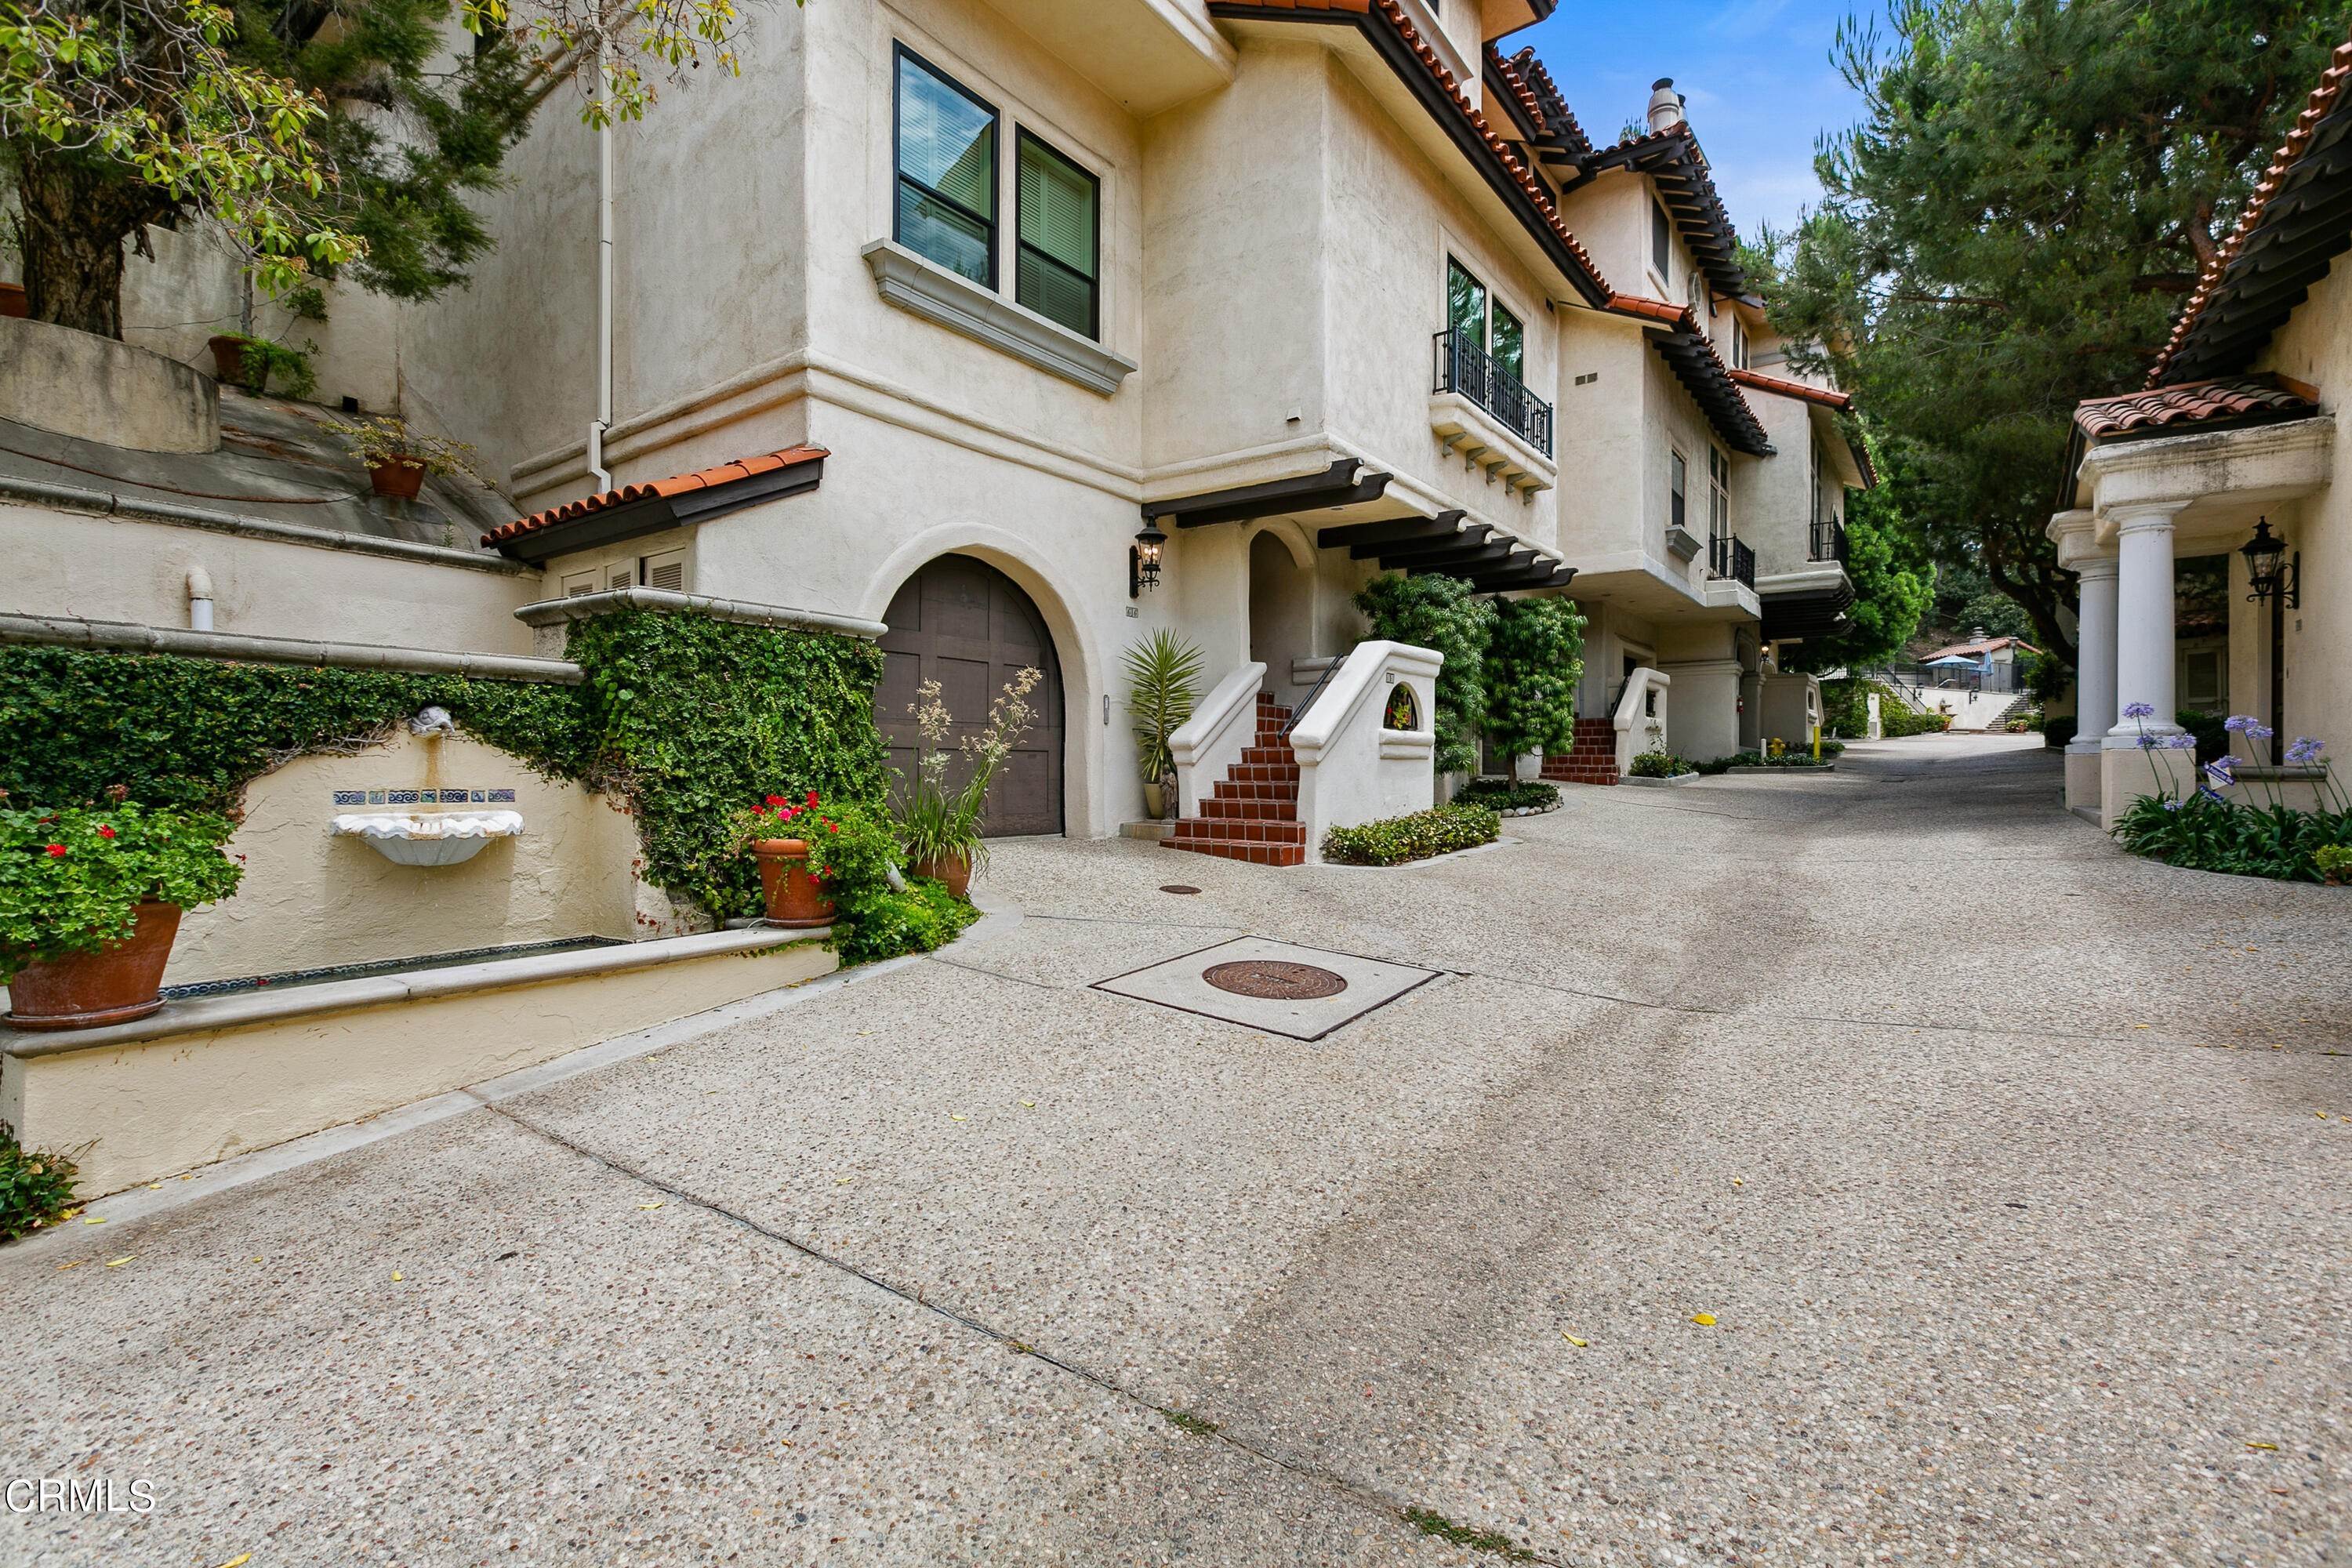 35. townhouses for Sale at 62 North Arroyo Boulevard Pasadena, California 91105 United States